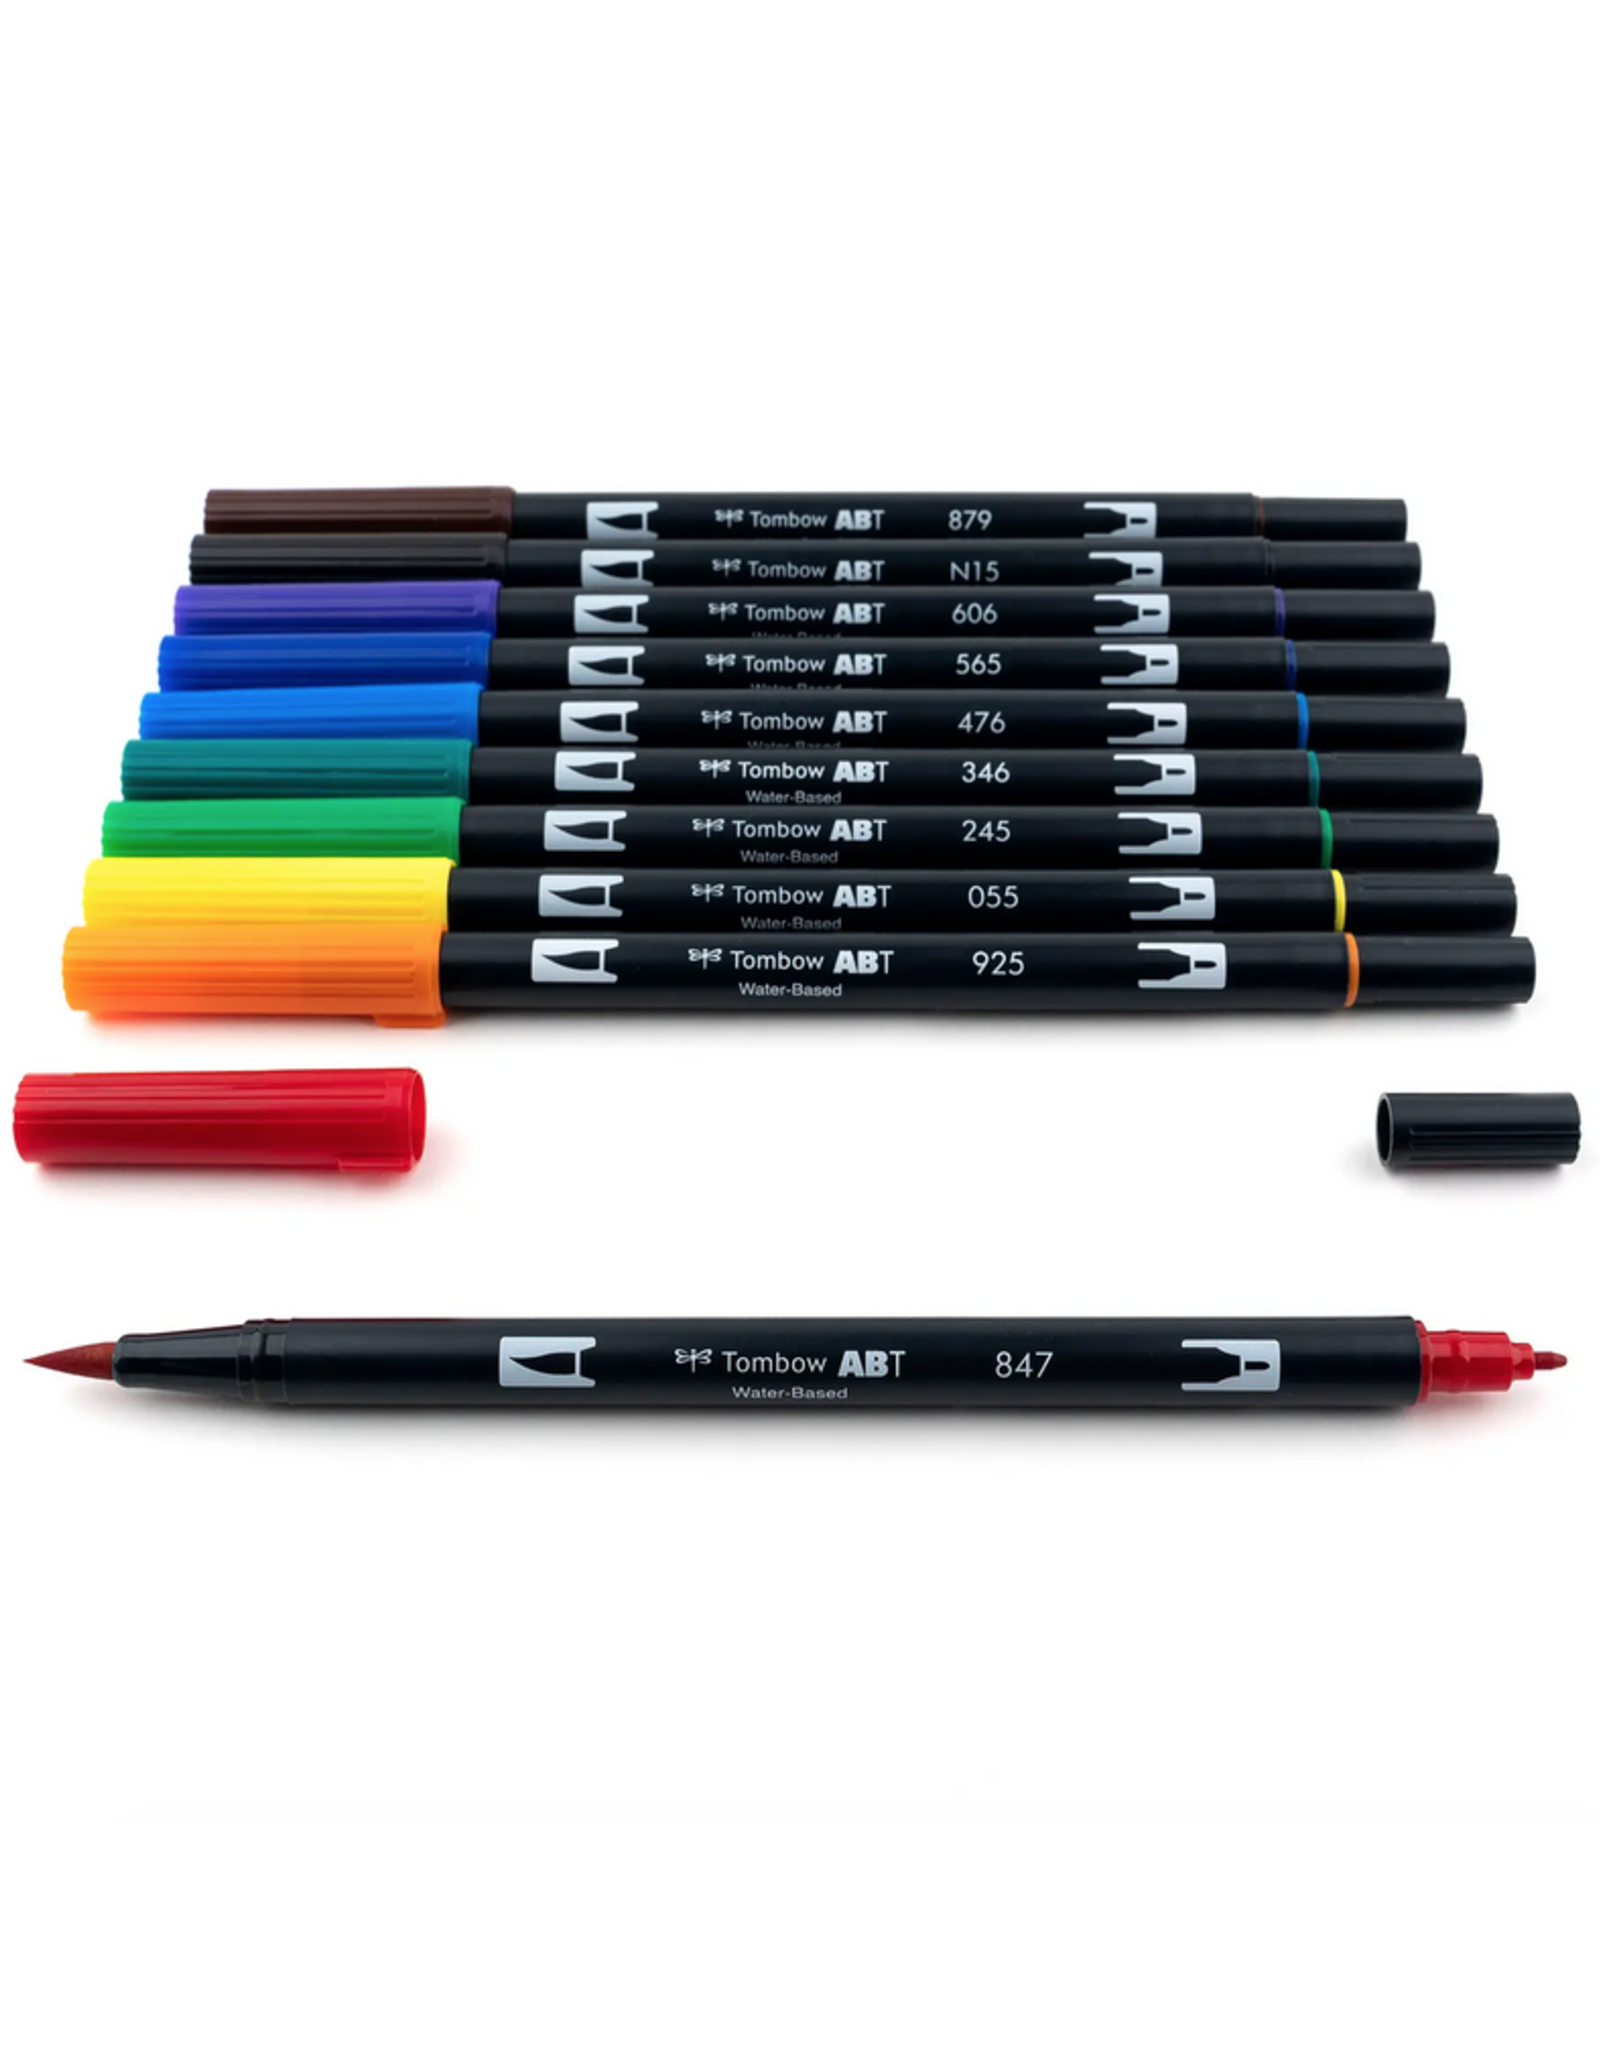 1500 Series Colored Pencils Set of 12